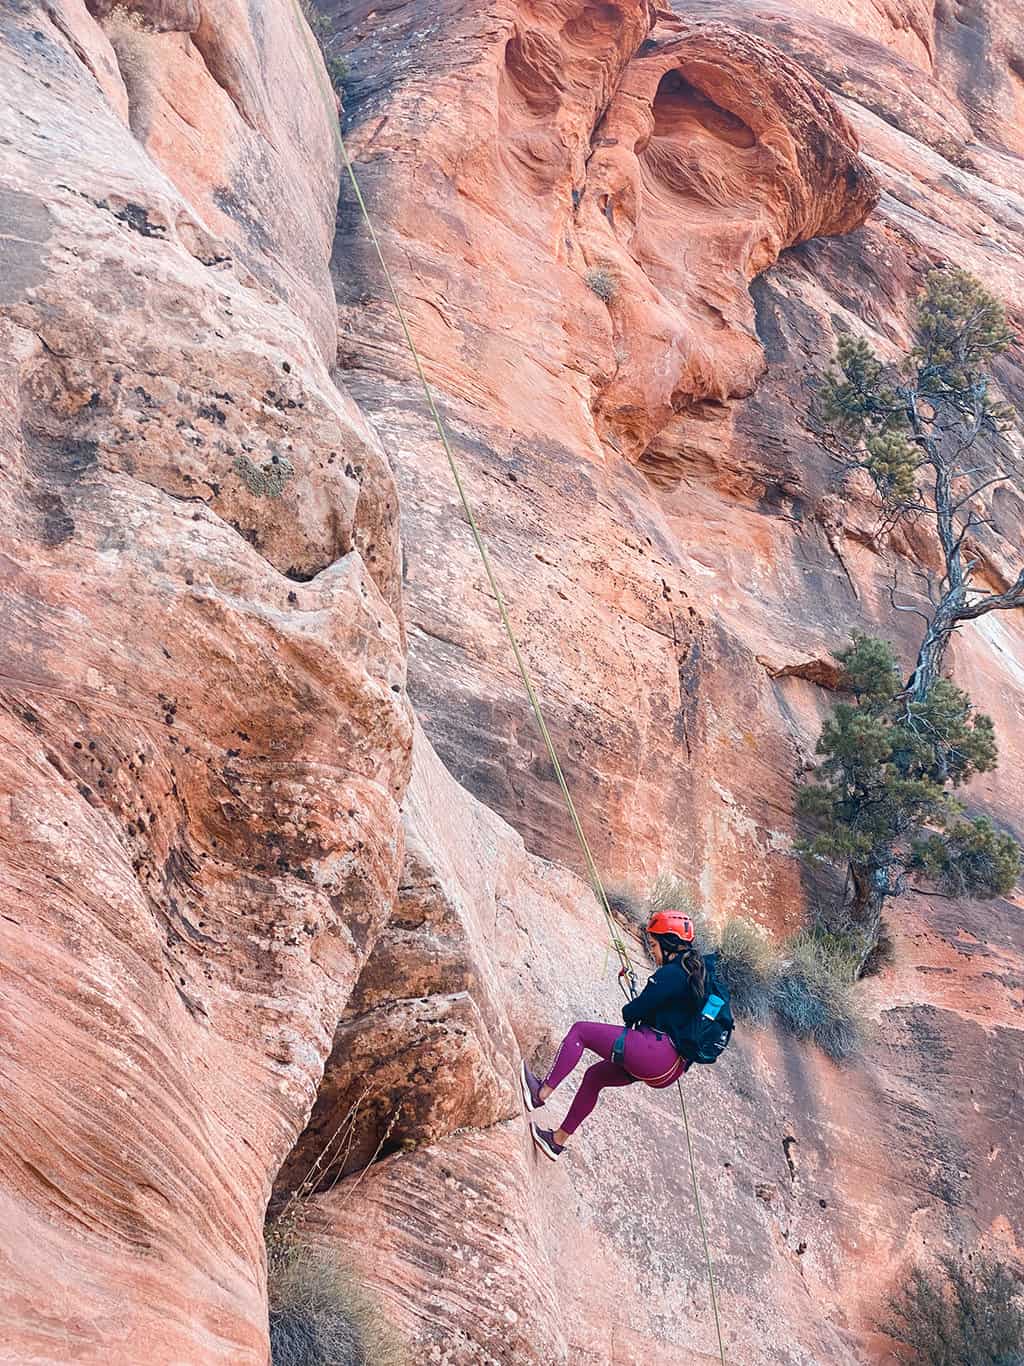 Zion National Park Utah canyoneering and Rappeling 